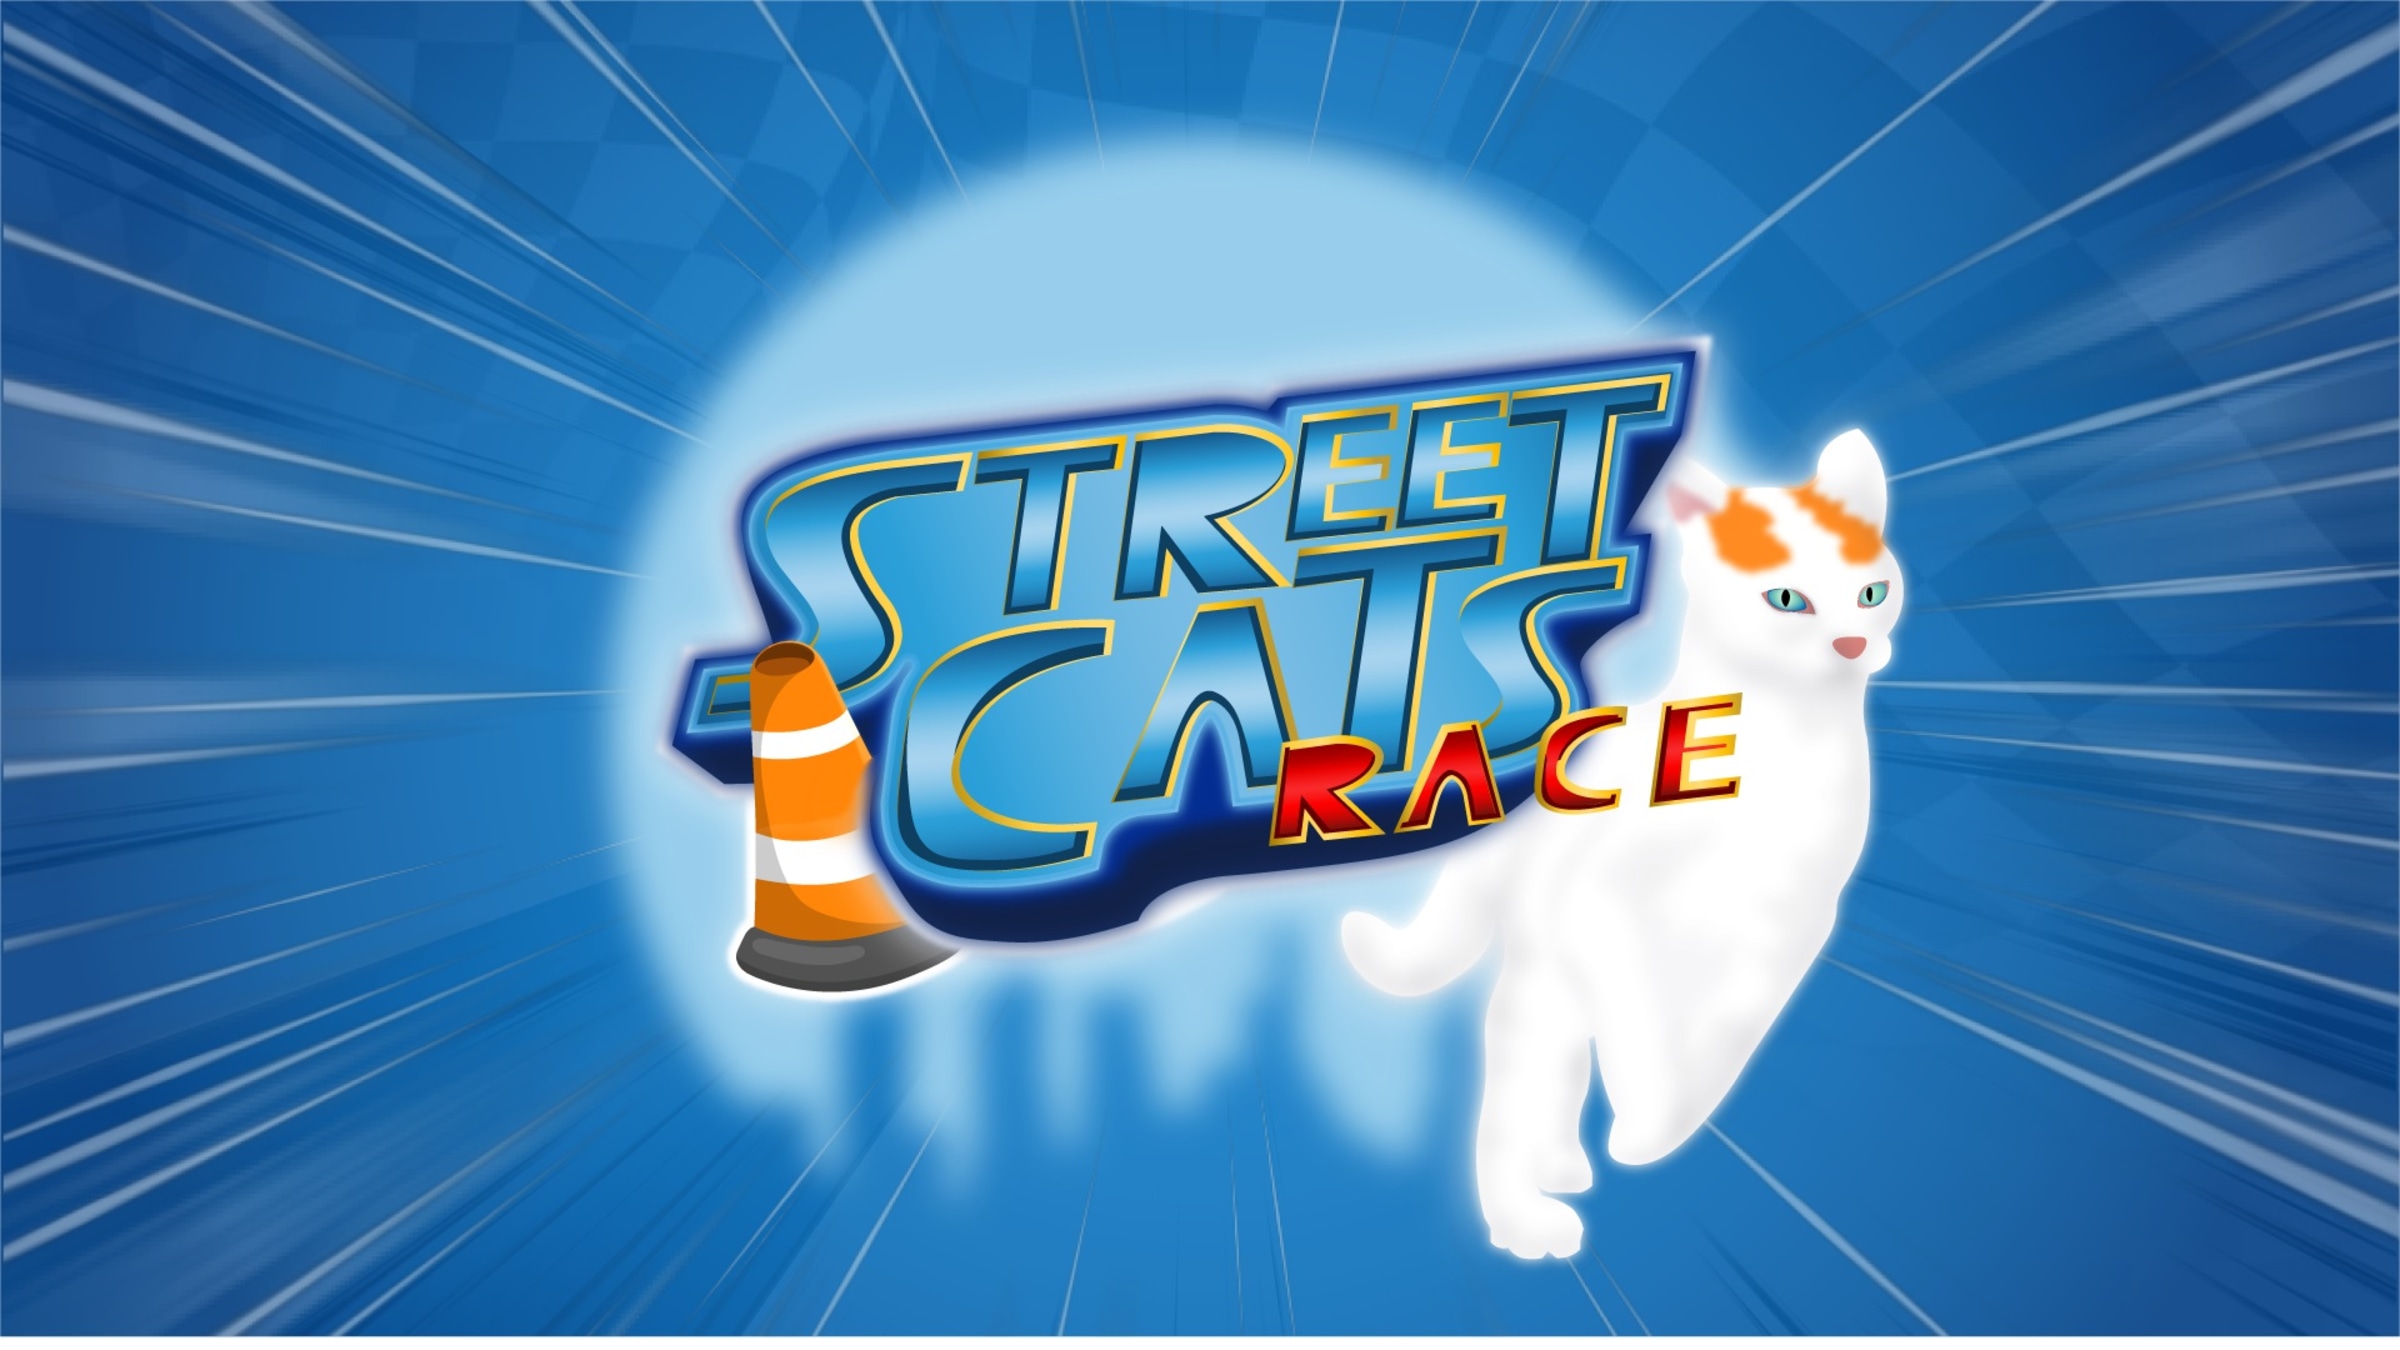 Street Cats Race for Switch - Nintendo Official Site